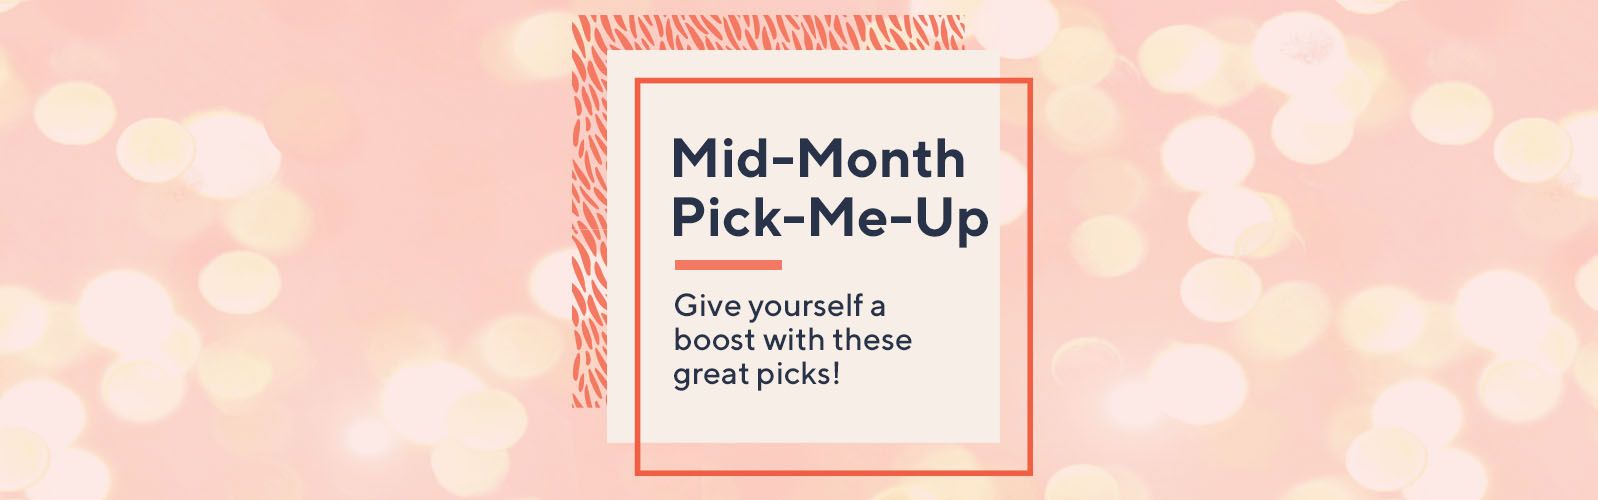 Mid-Month Pick-Me-Up. Give yourself a boost with these great picks!